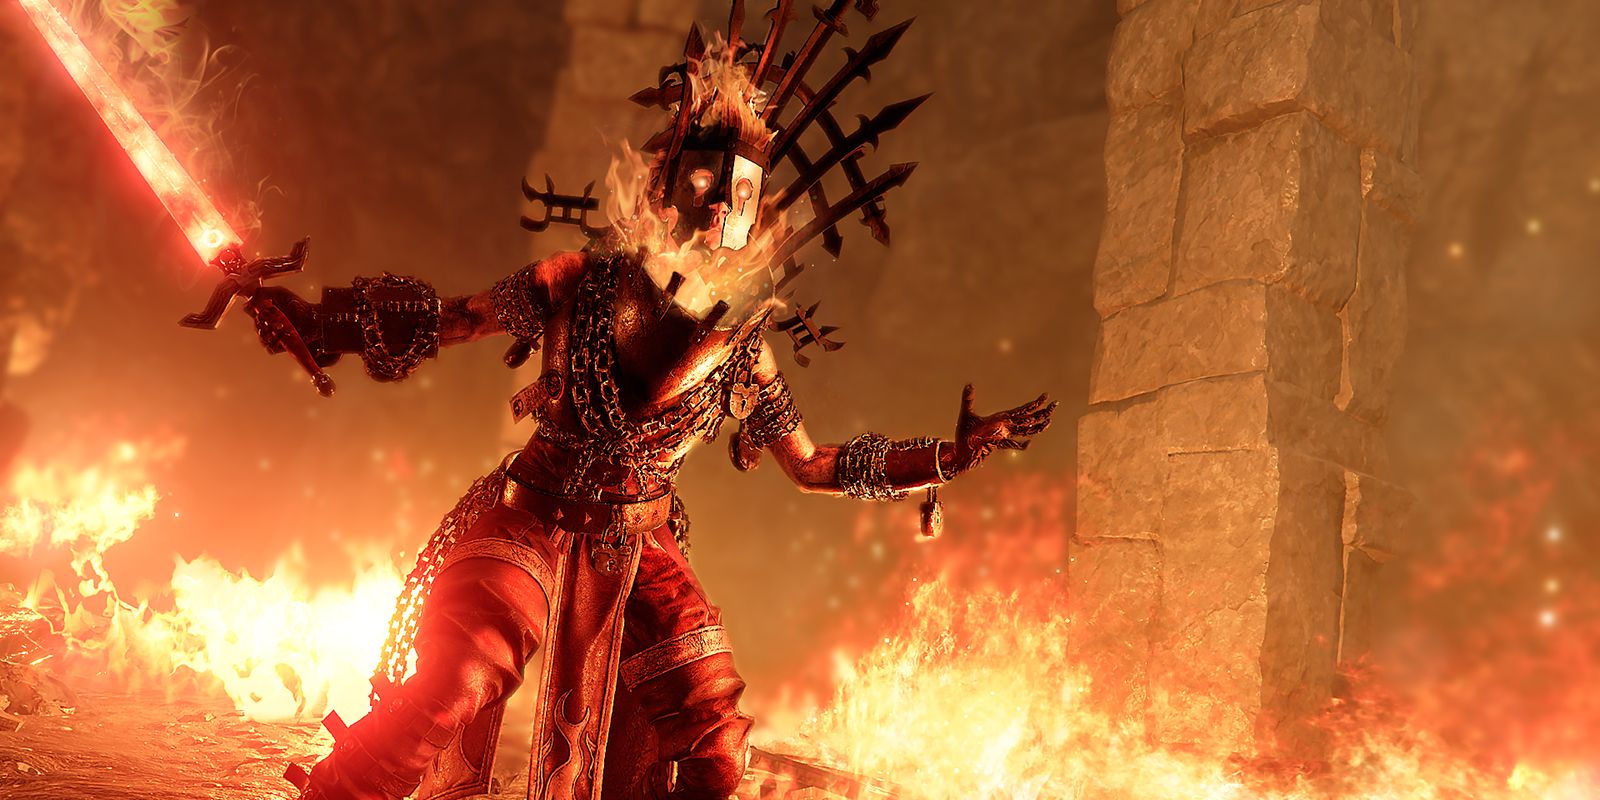 demon warrior surrounded by fire